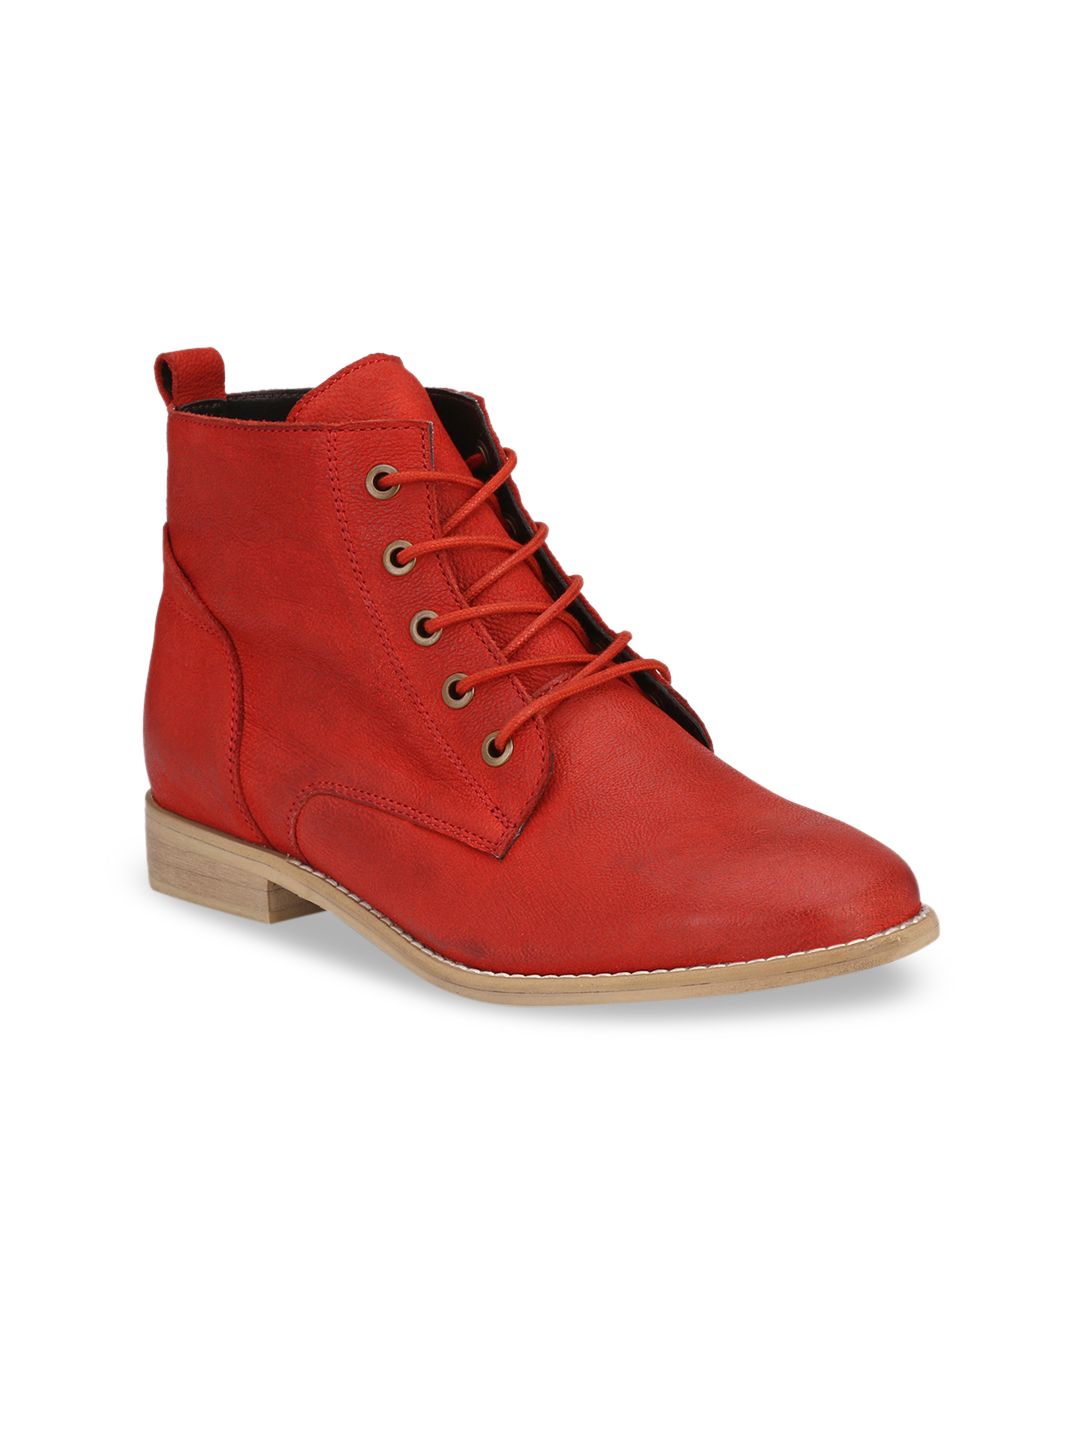 Alberto Torresi Women Red Solid Leather Mid-Top Flat Boots Price in India